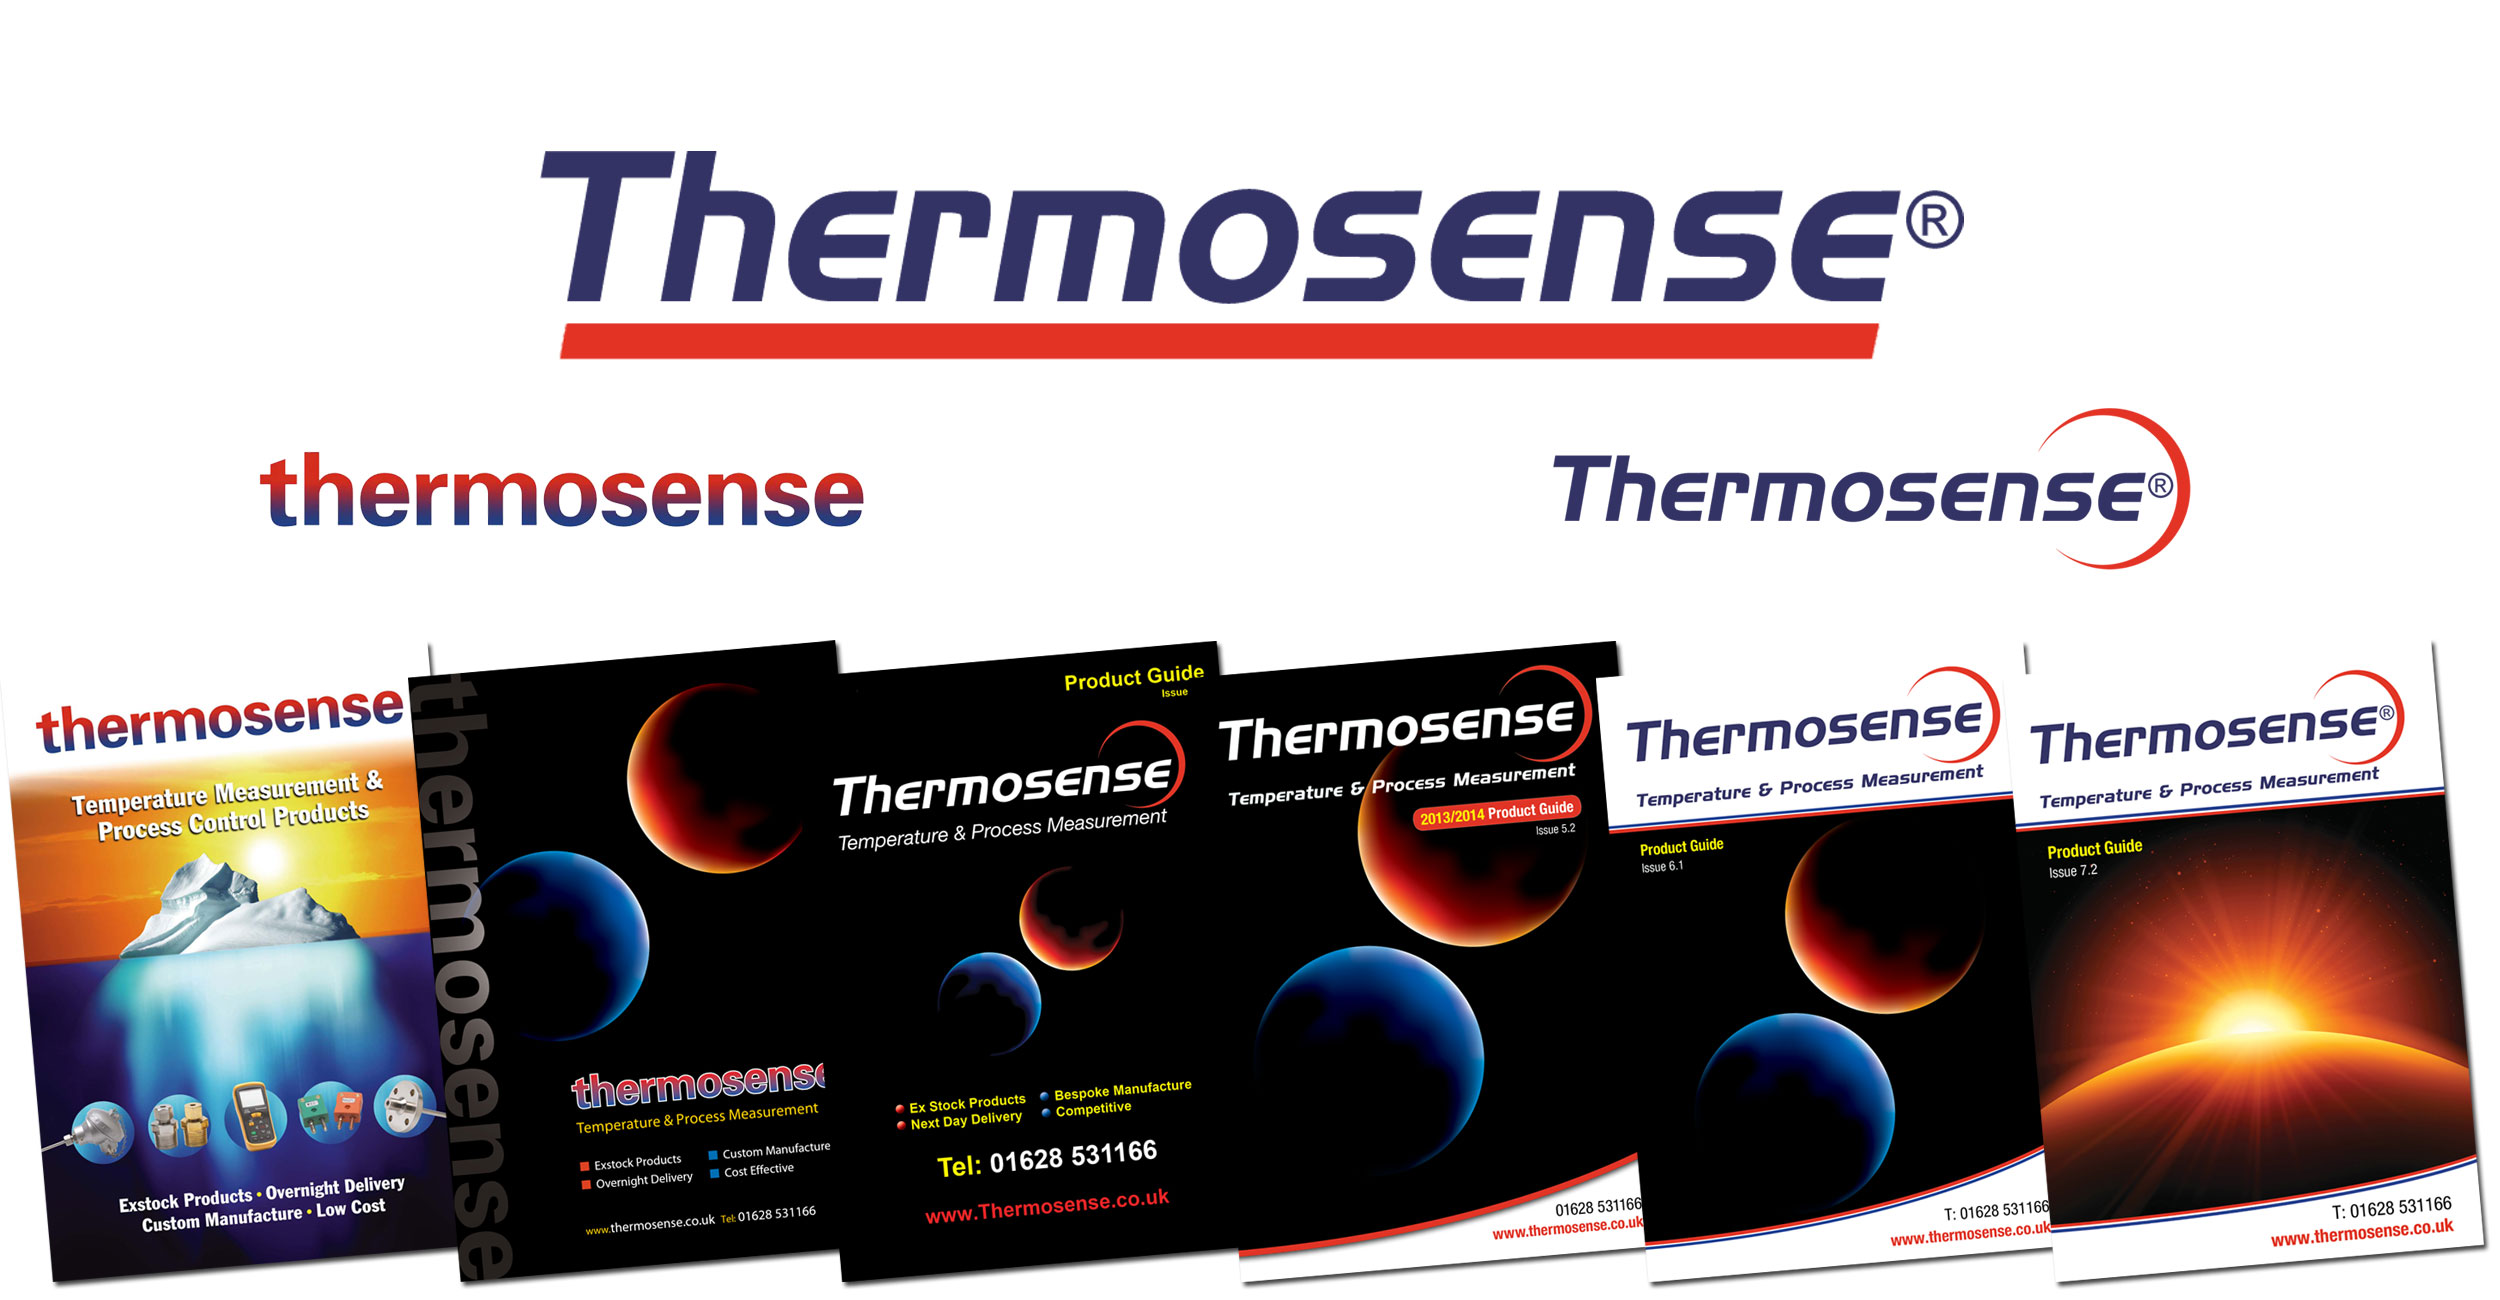 Evolution of Thermosense logos and product guides